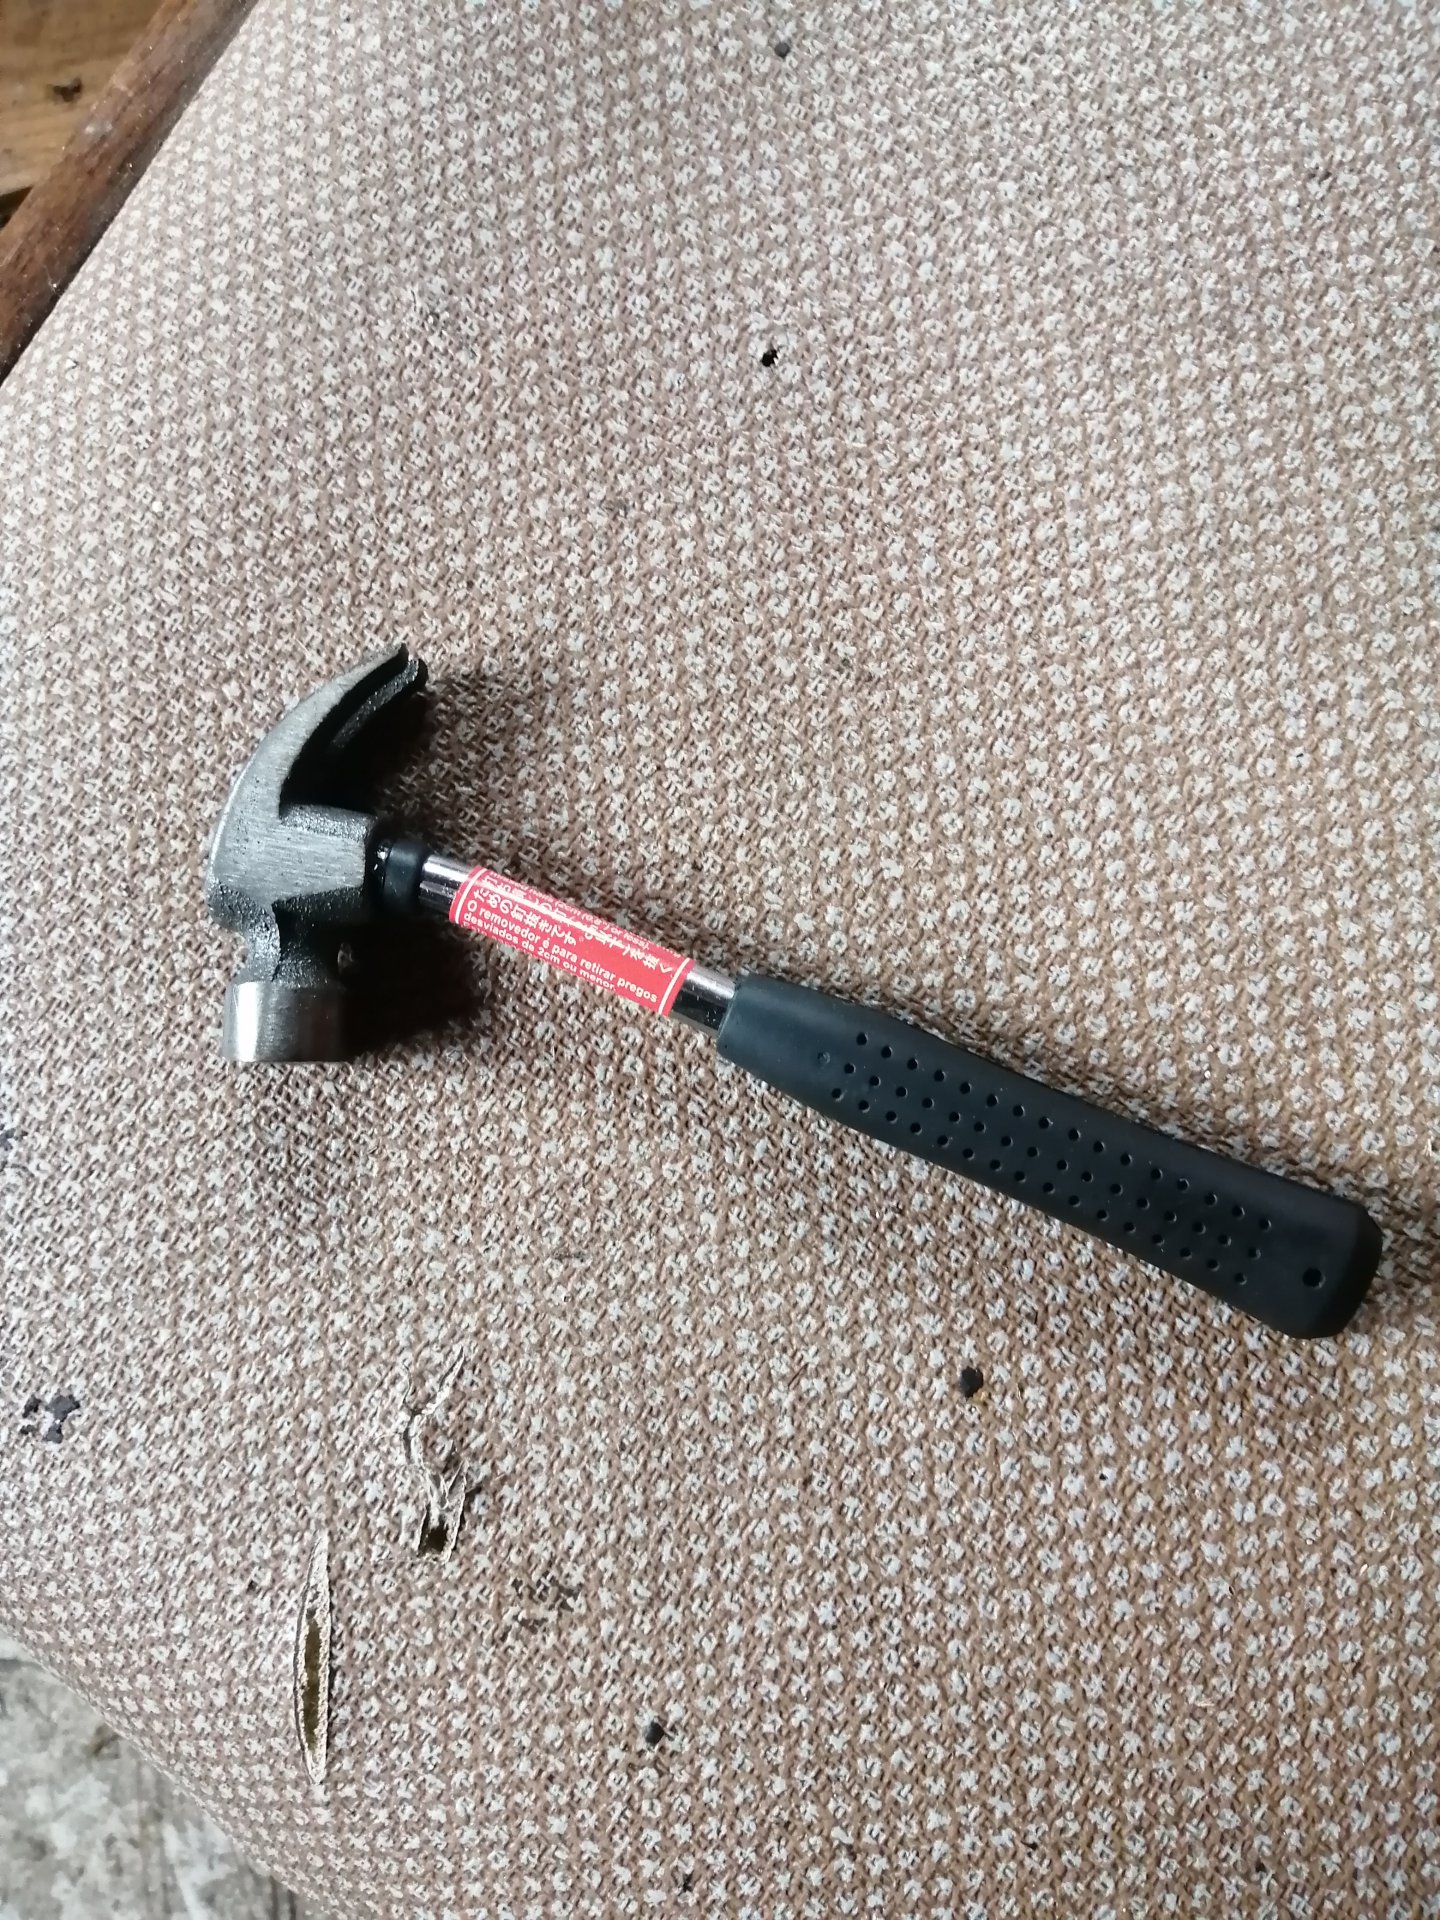 Was trying to pull a nail and bent the metal handle.